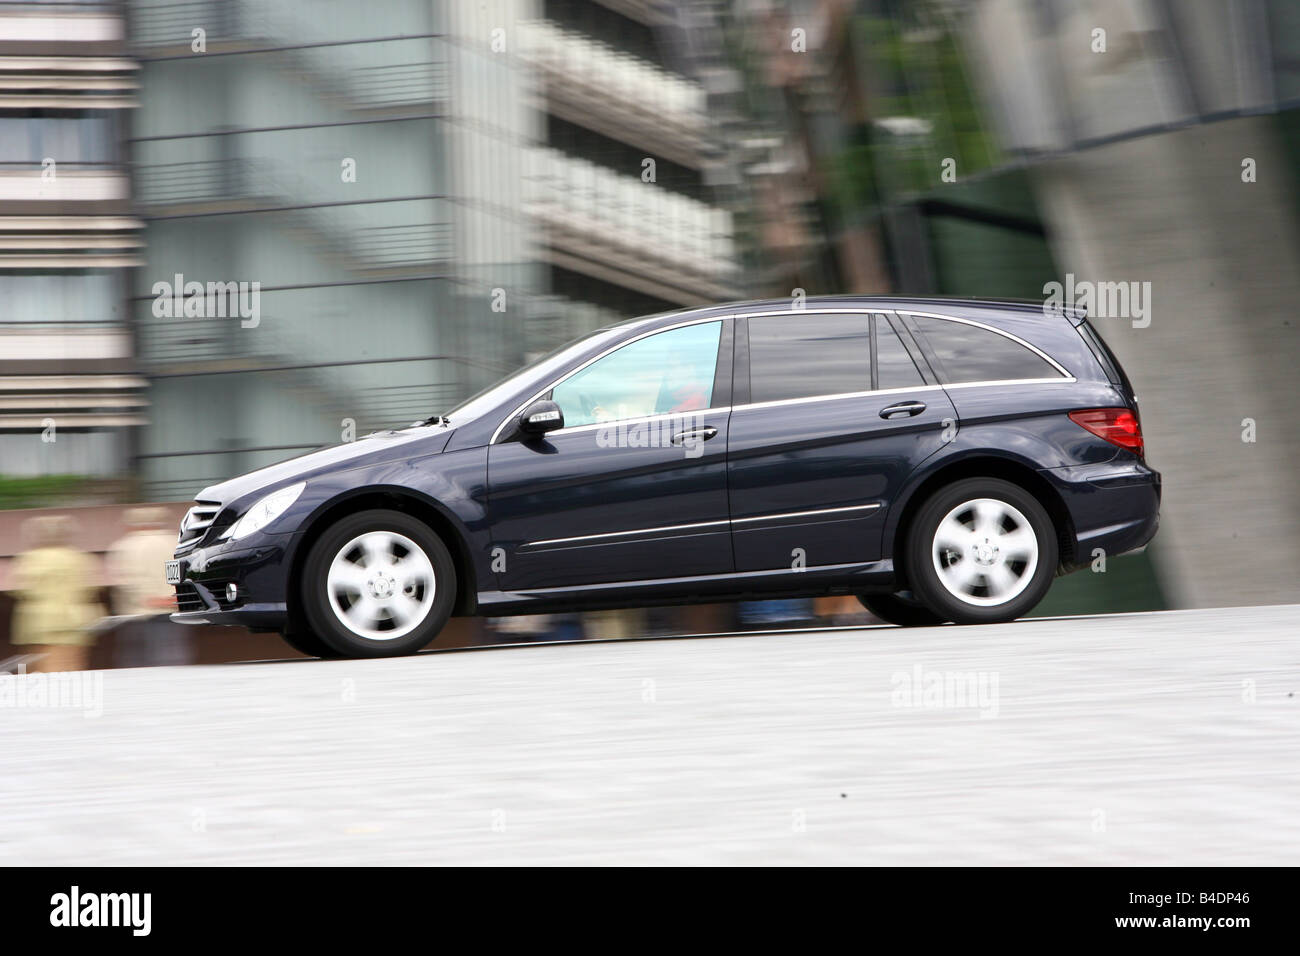 Mercedes R 280, 2005- black, driving, side view, City Stock Photo